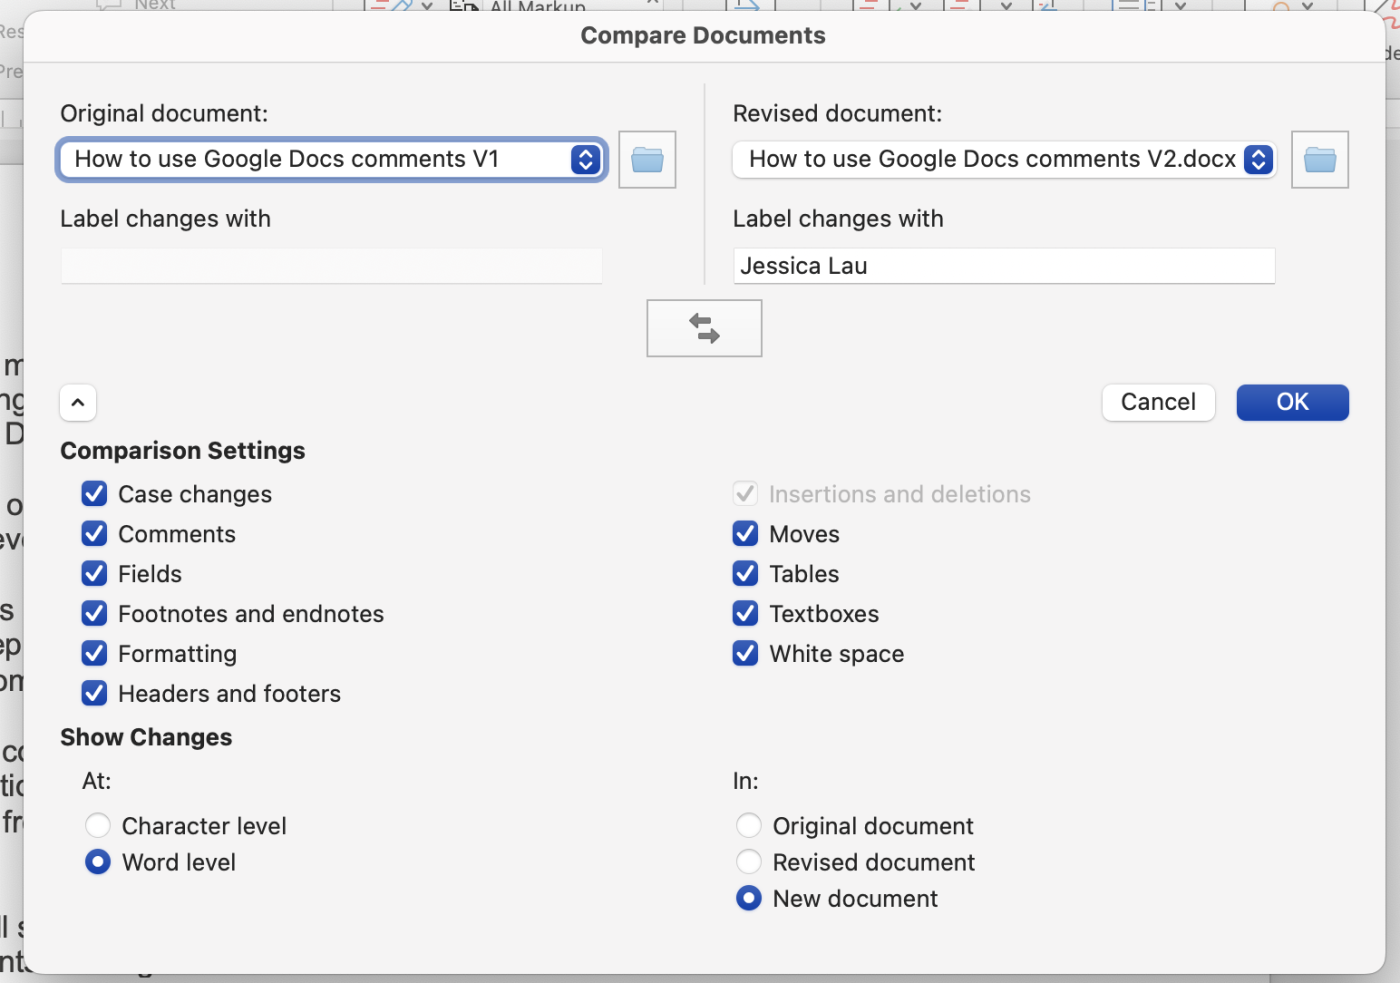 Compare documents in Word with dropdowns to upload two files to compare and other comparison settings.